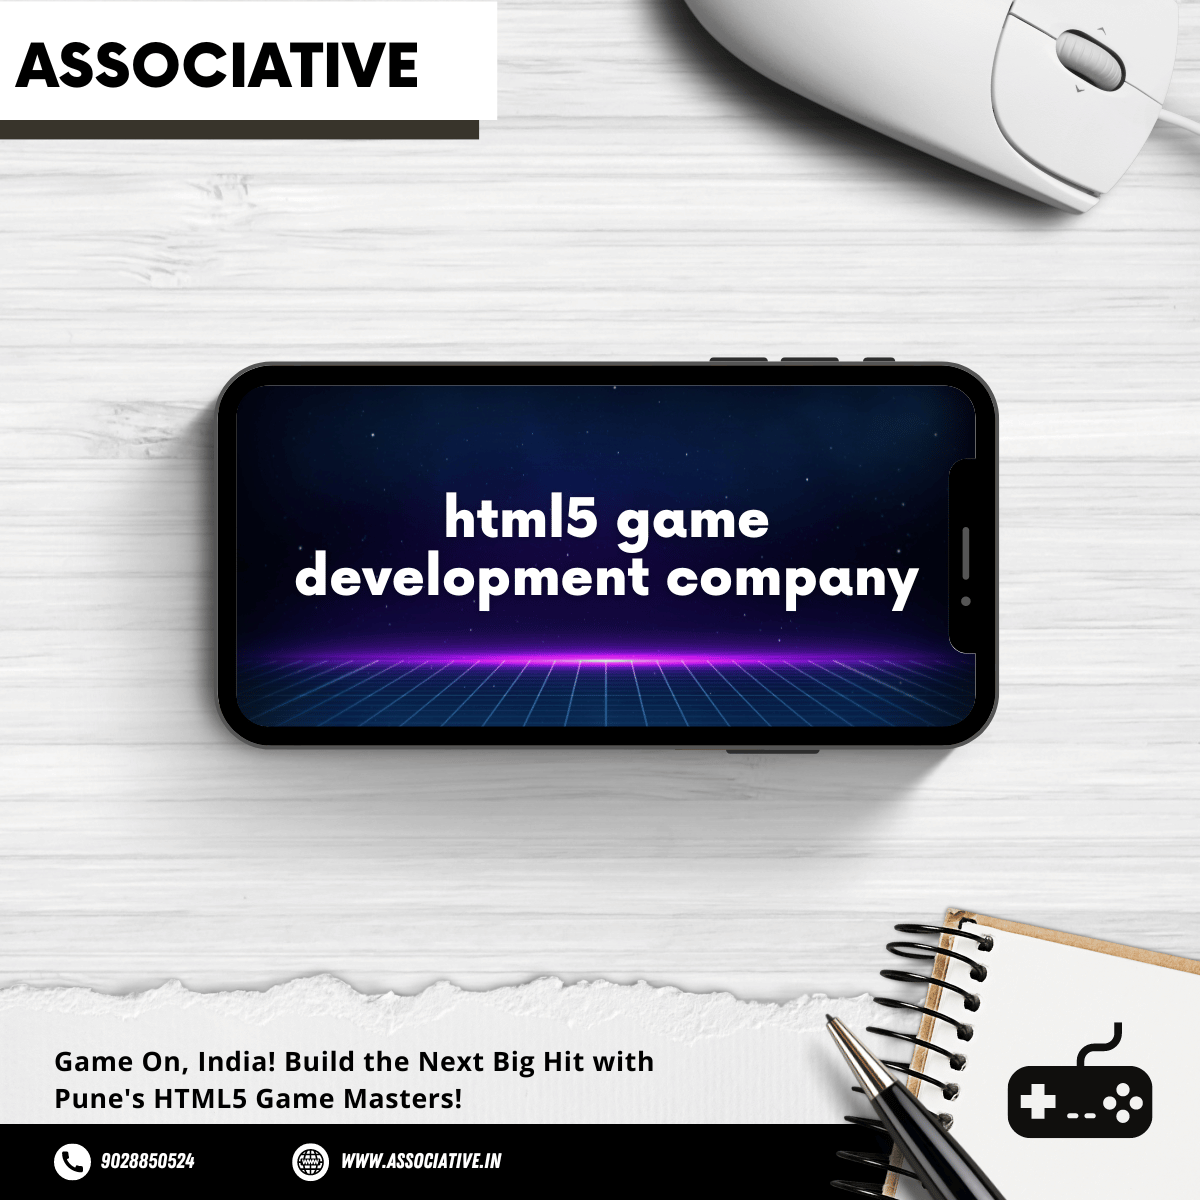 Build the Next Big Hit with Pune's HTML5 Game Masters!